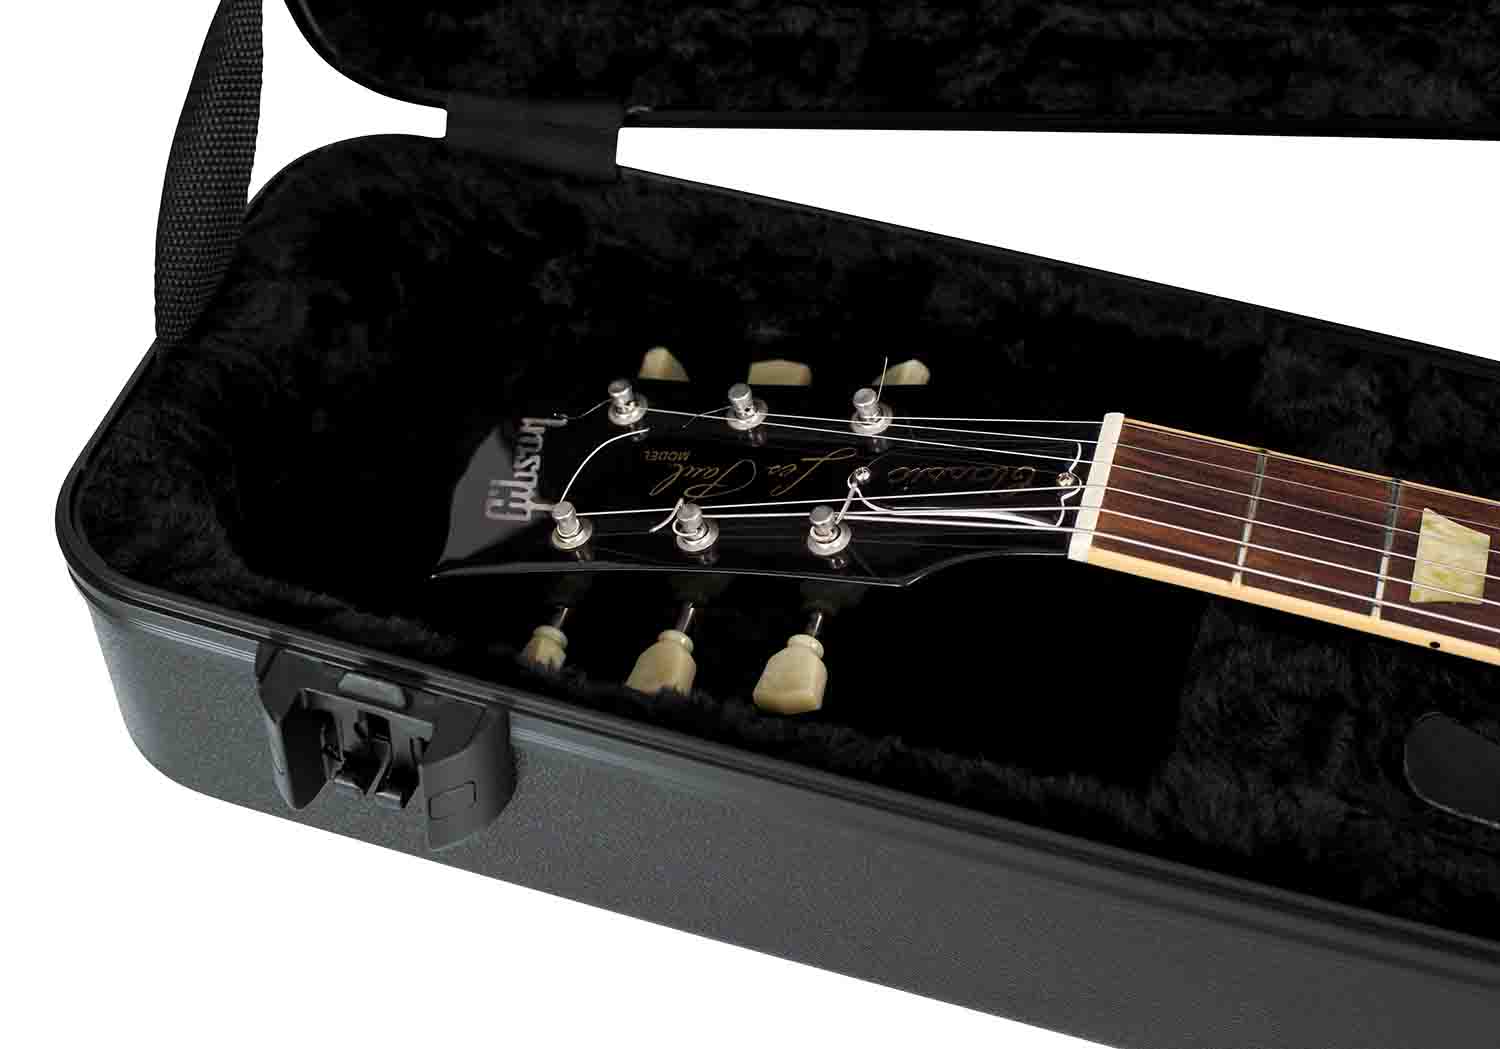 Gator Cases GTSA-GTRLPS Guitar Case for Gibson Les Paul and Single Cutaway Electric Guitars - Hollywood DJ